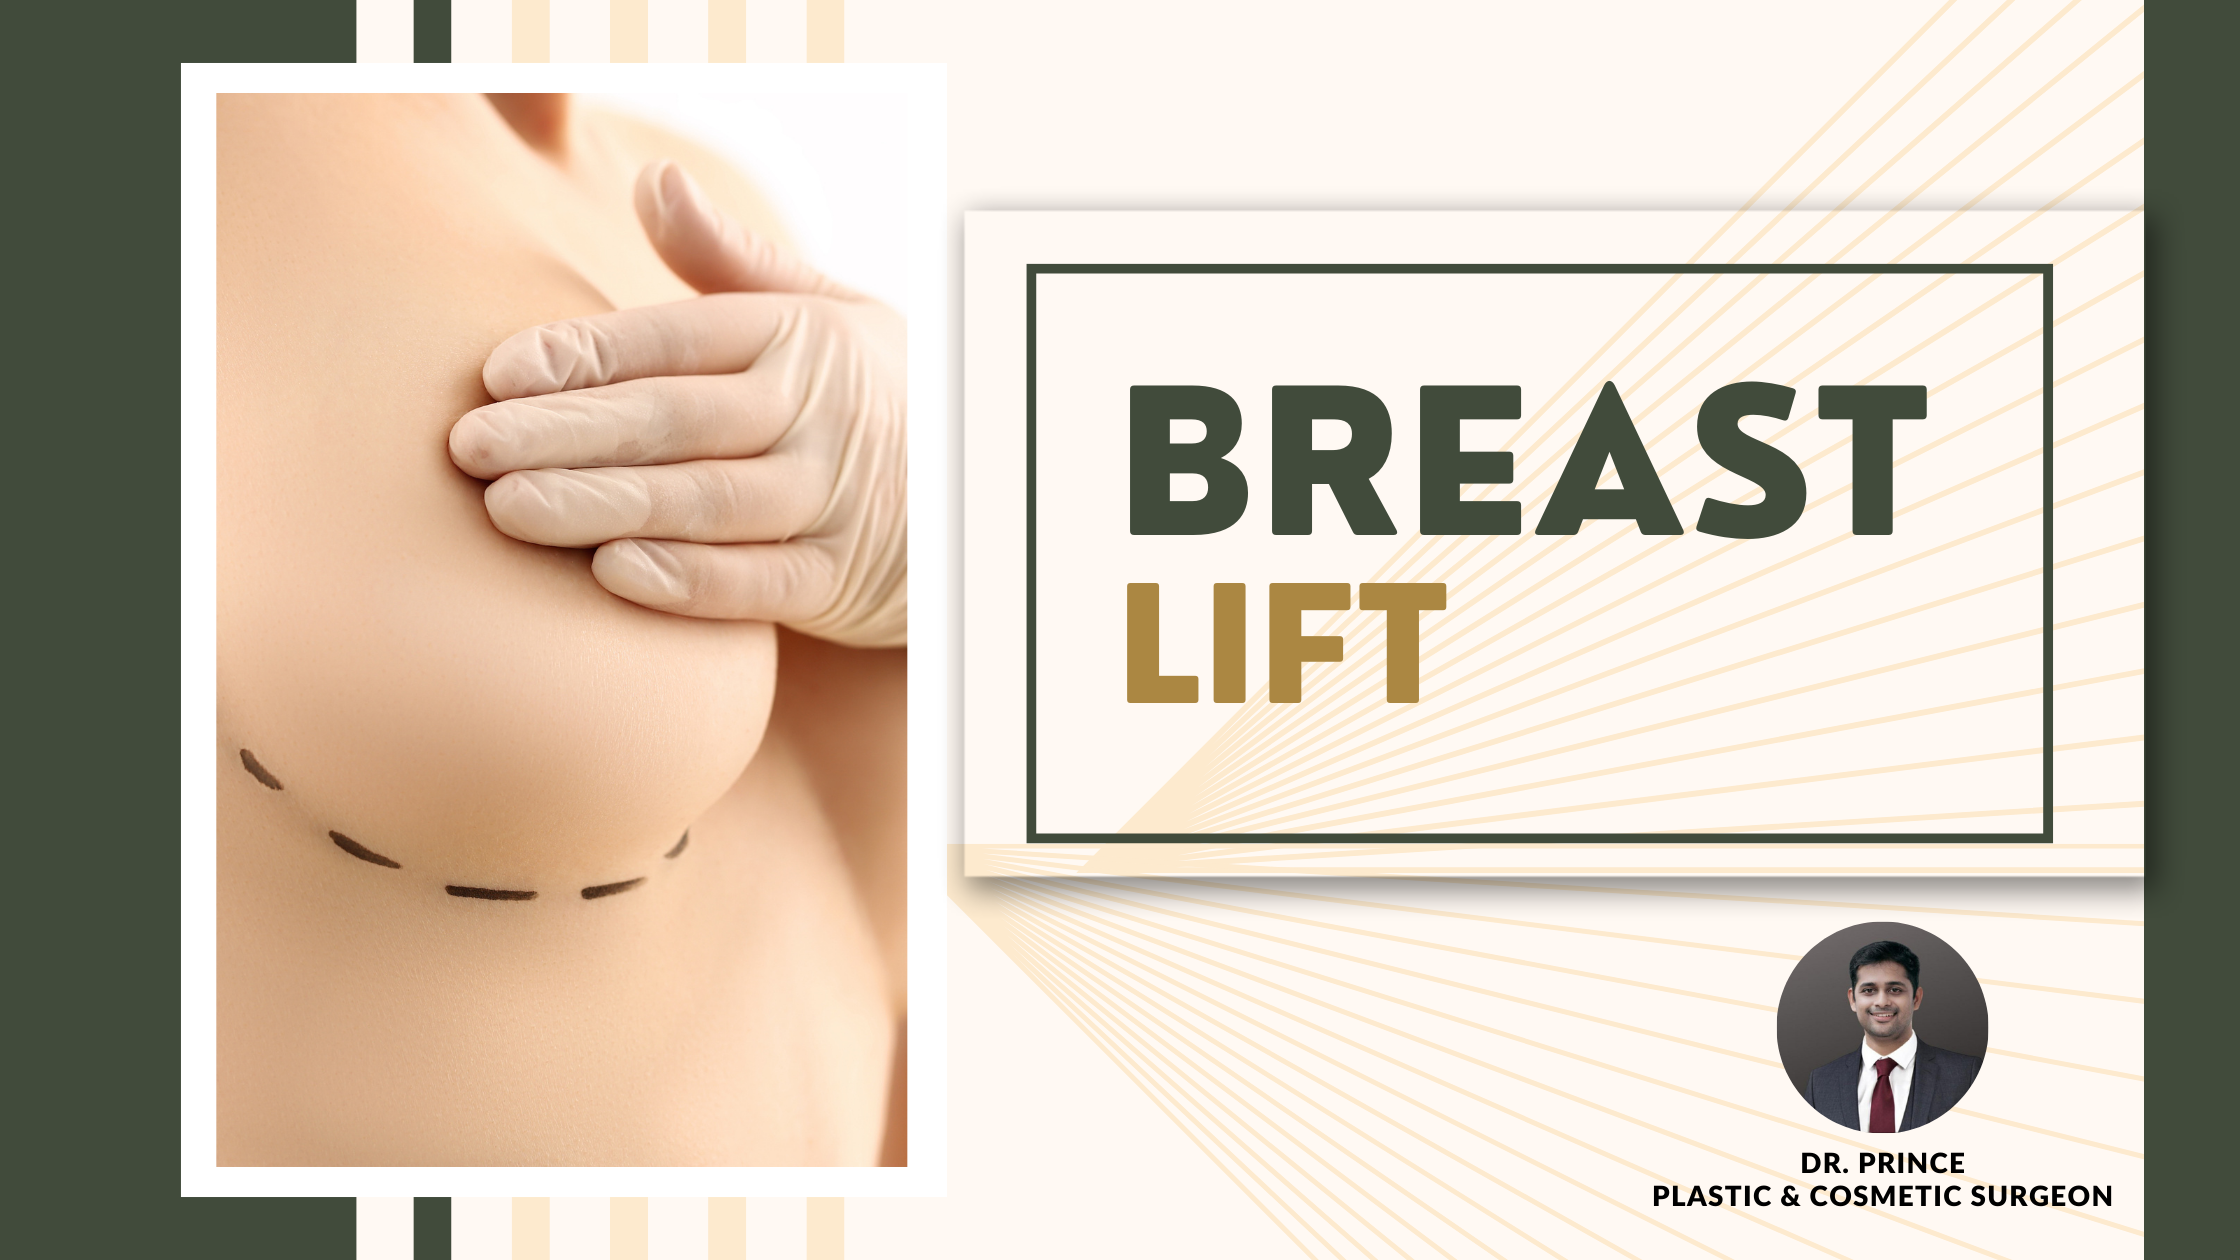 Dr. Prince performs breast lift surgery, artfully sculpting natural and uplifted contours for enhanced breast aesthetics.